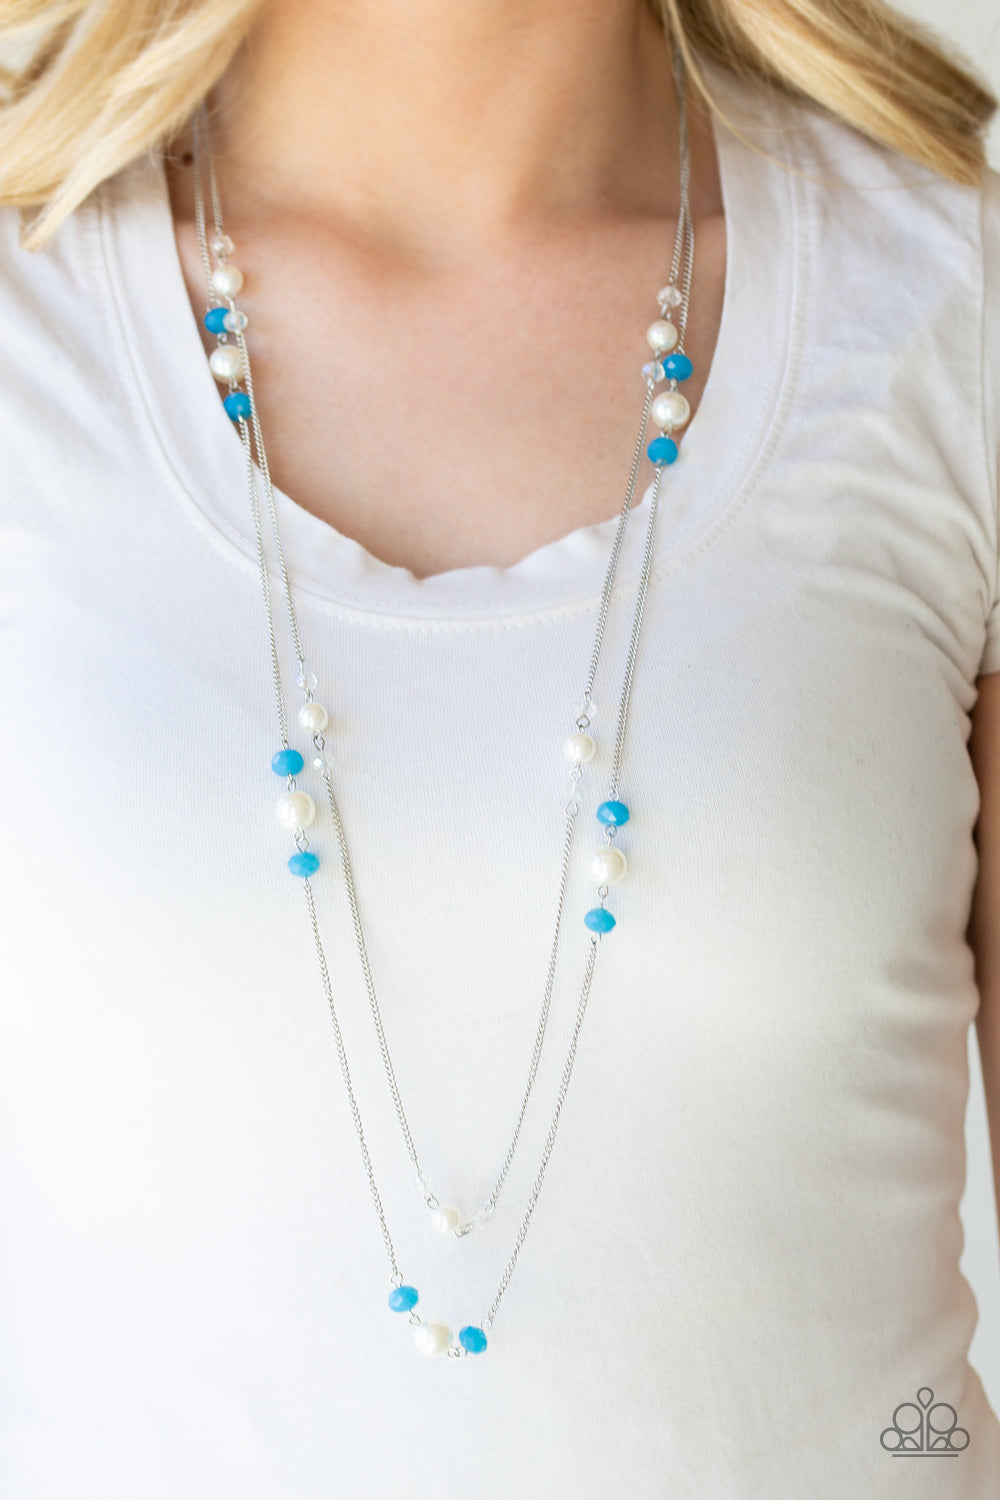 Paparazzi Spring Splash - Blue - Necklace and matching Earrings - $5 Jewelry With Ashley Swint